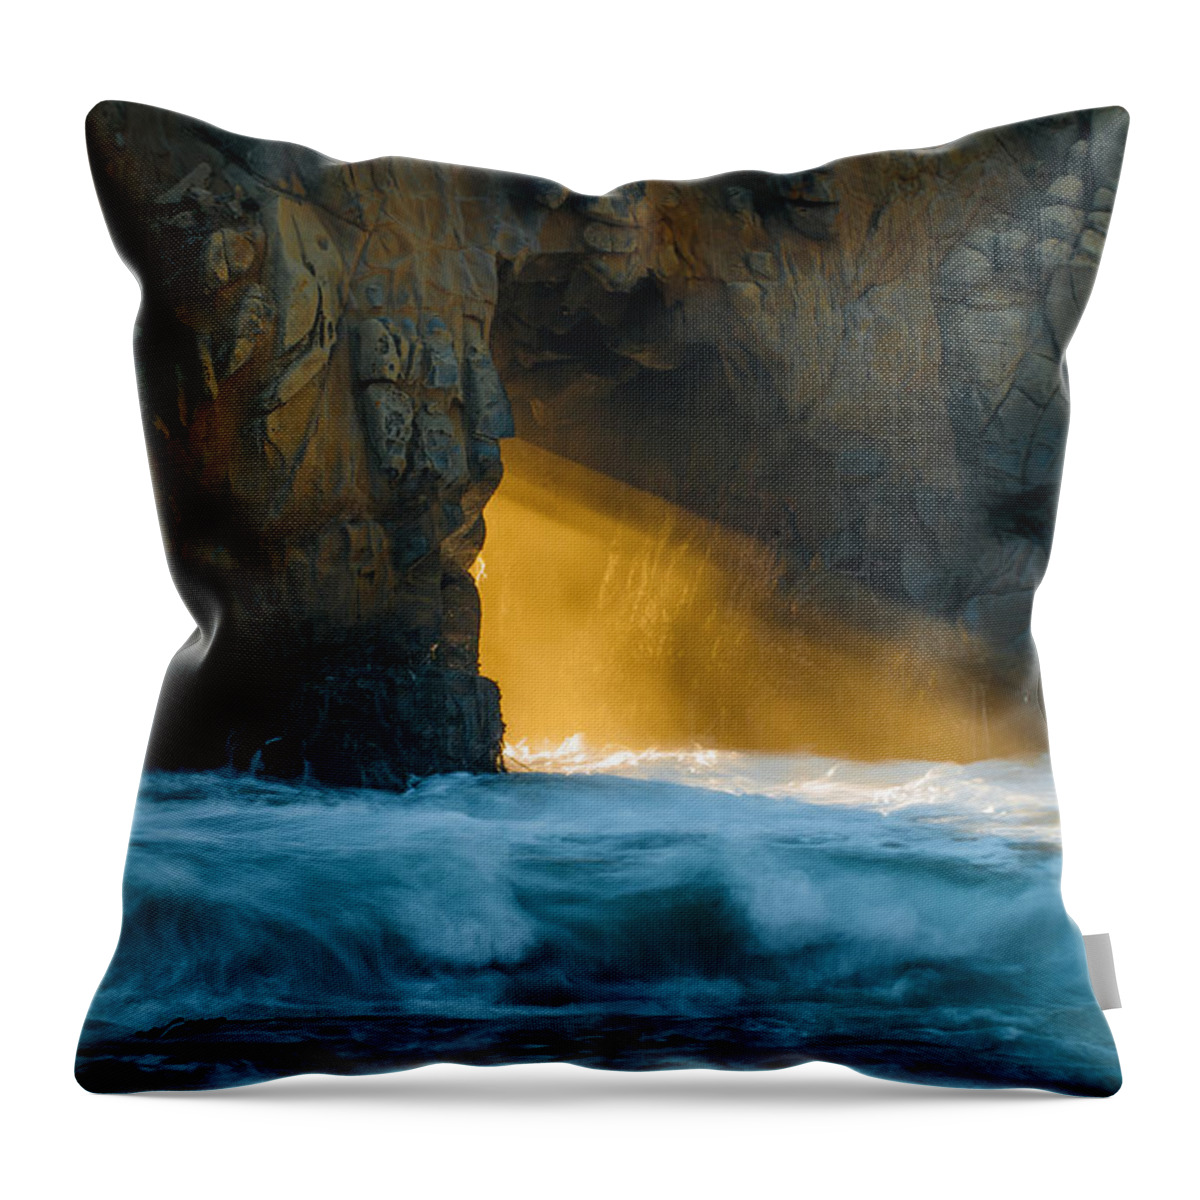 Chaos Throw Pillow featuring the photograph Chaos - Pfeiffer Beach by George Buxbaum